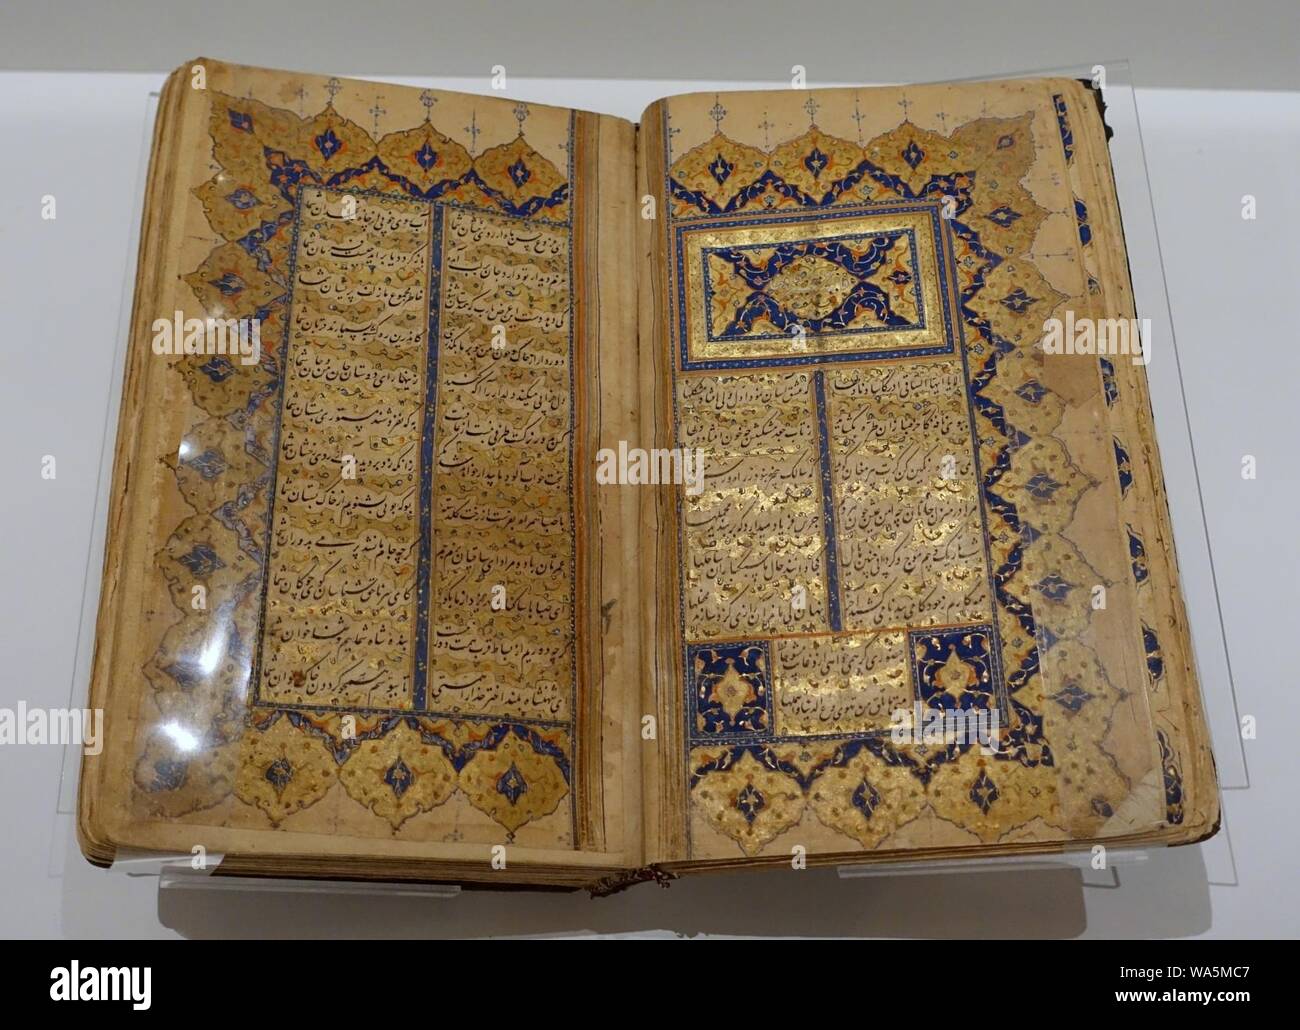 Divan, collected works, by Hafez, calligraphy by Enayatollah al-Shirazi, Iran, late 16th century AD, ink, watercolour, gold on paper Stock Photo